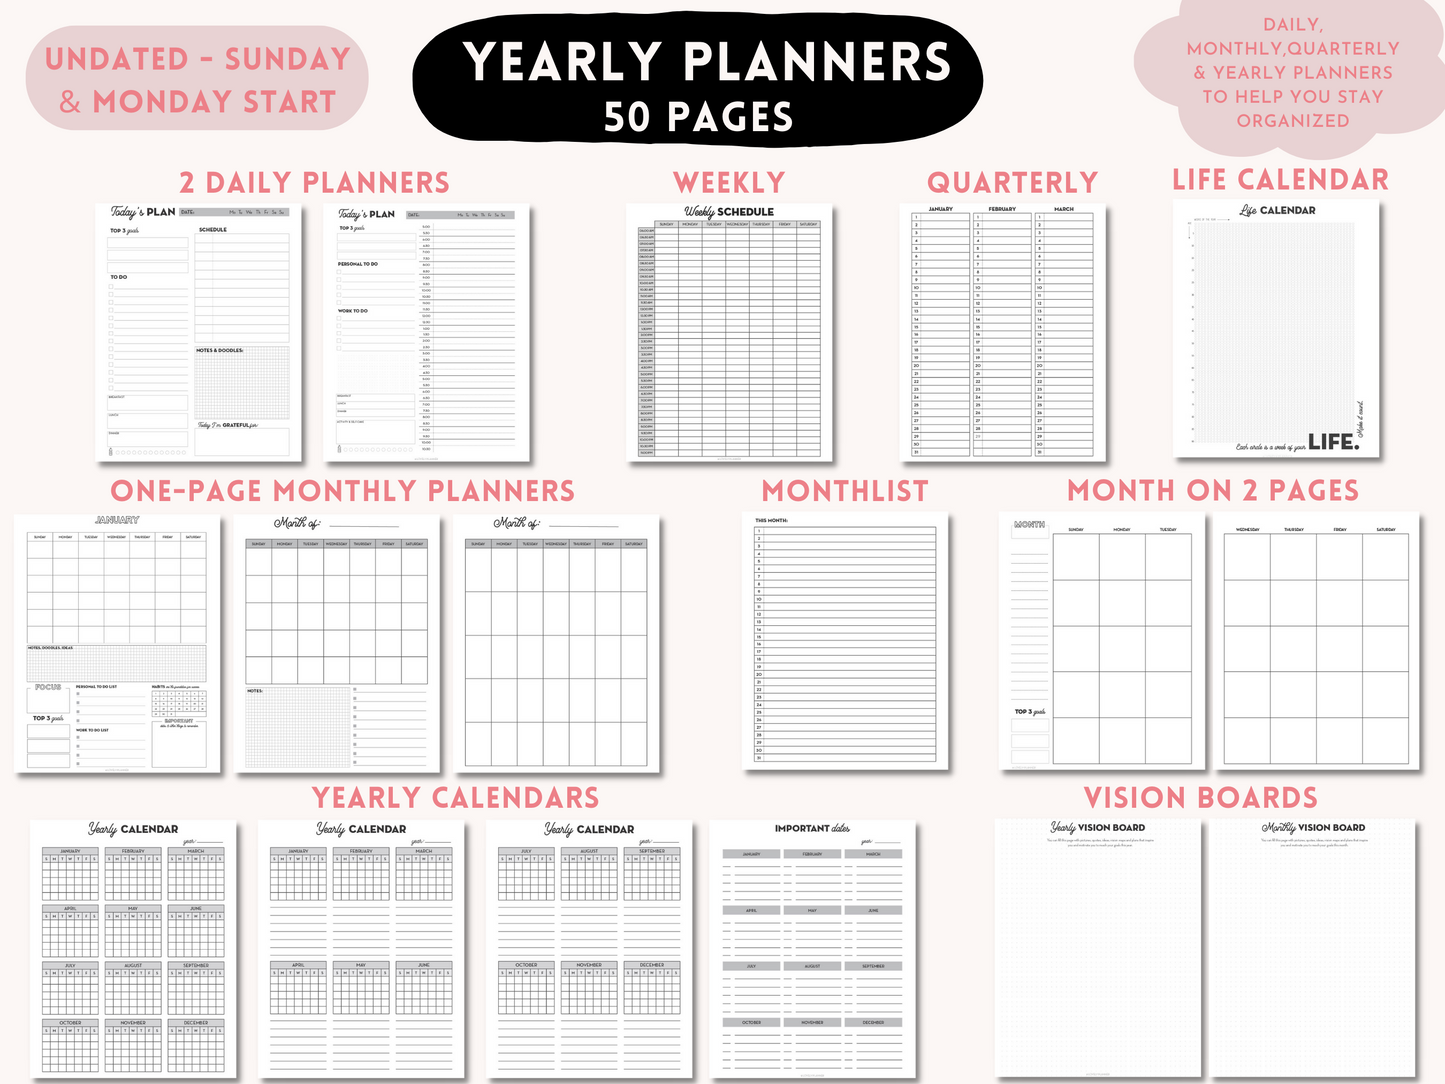 Ultimate Planner Bundle - 160 Printable Planner Inserts for A5, US Letter, Classic Happy Planner